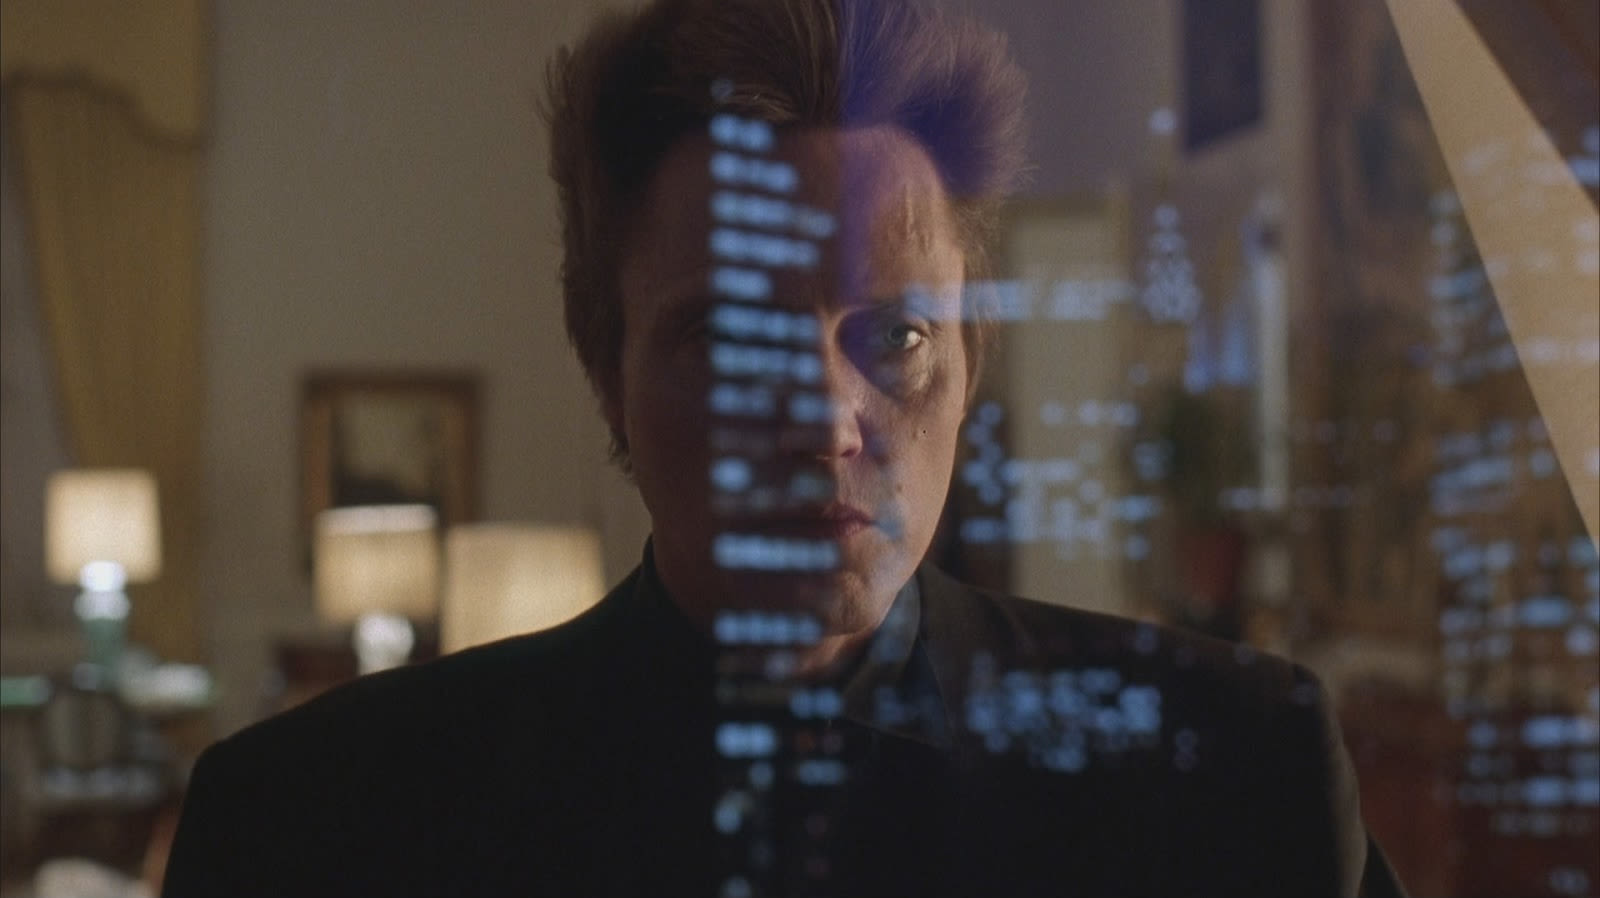 All Of Christopher Walken's Best Villain Roles Have One Thing In Common - SlashFilm